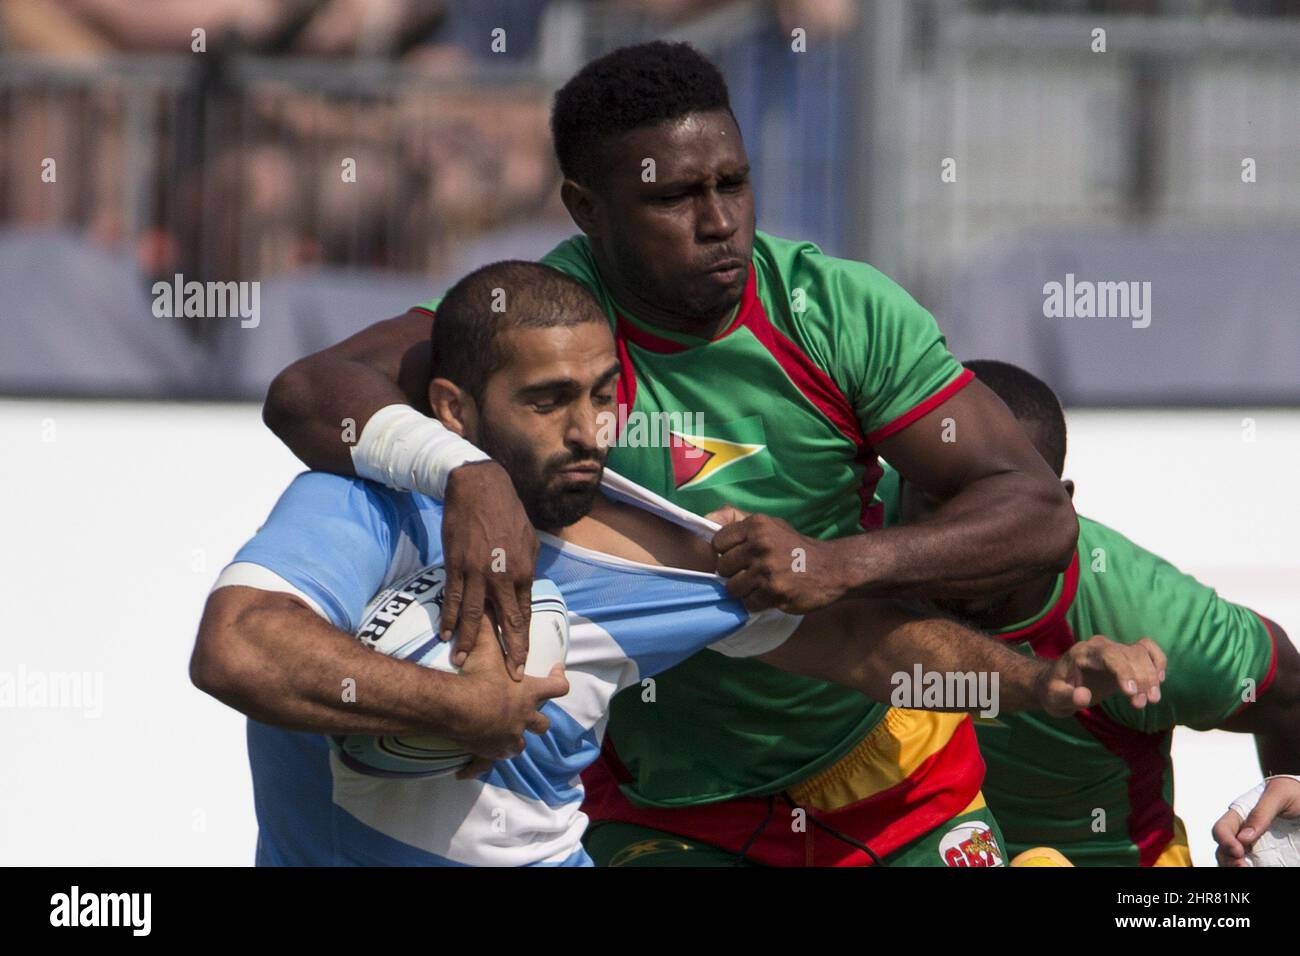 Argentina's Gaston Revol (left) is tackled by Guyana's Claudius Butts during men's rugby sevens at the Pan Am games in Toronto on Saturday July 11. 2015. THE CANADIAN PRESS/Chris Young Stock Photo